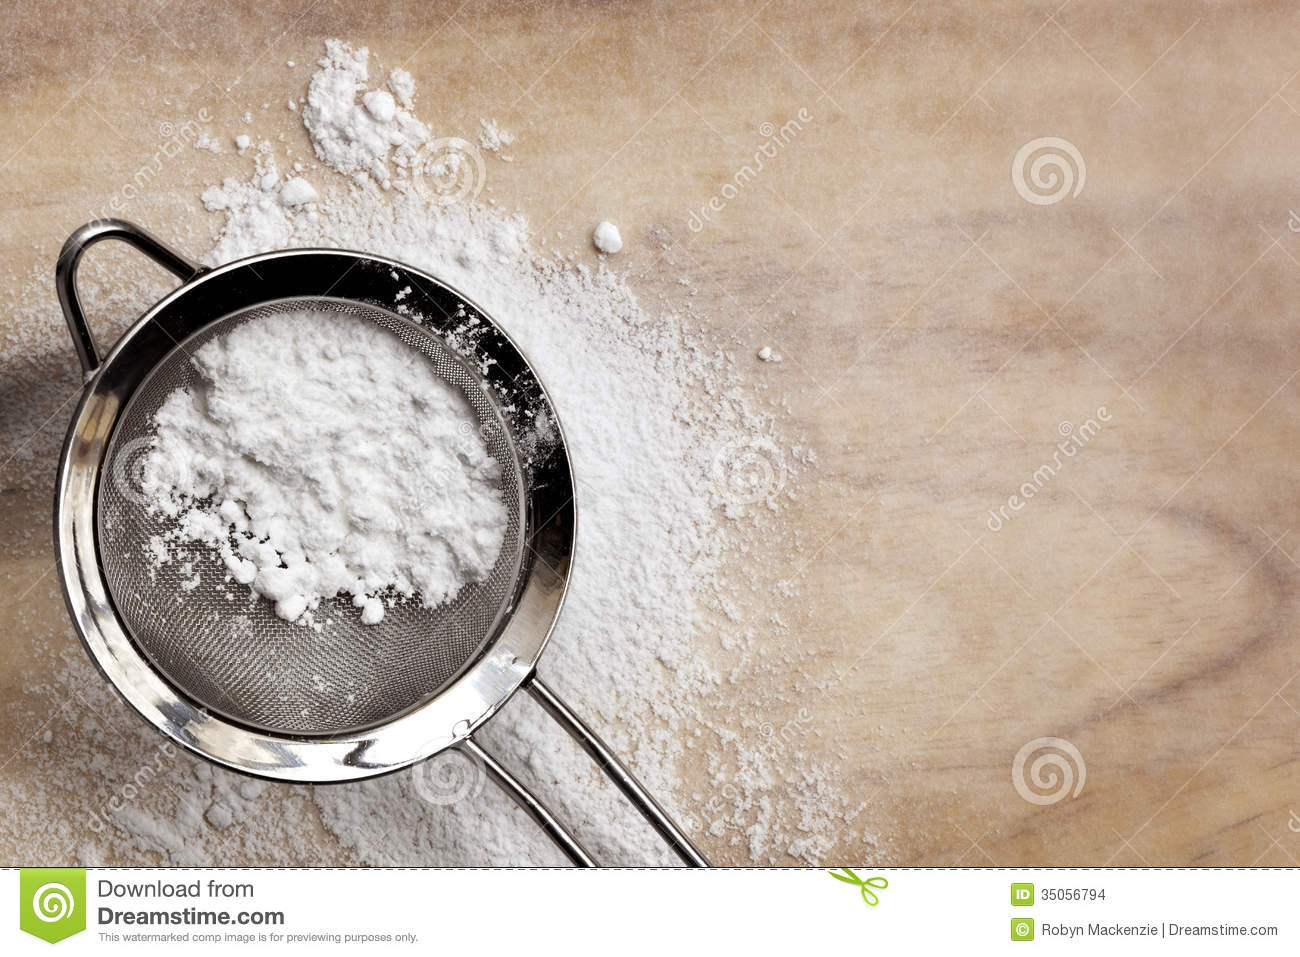 Icing Sugar Stock Images.